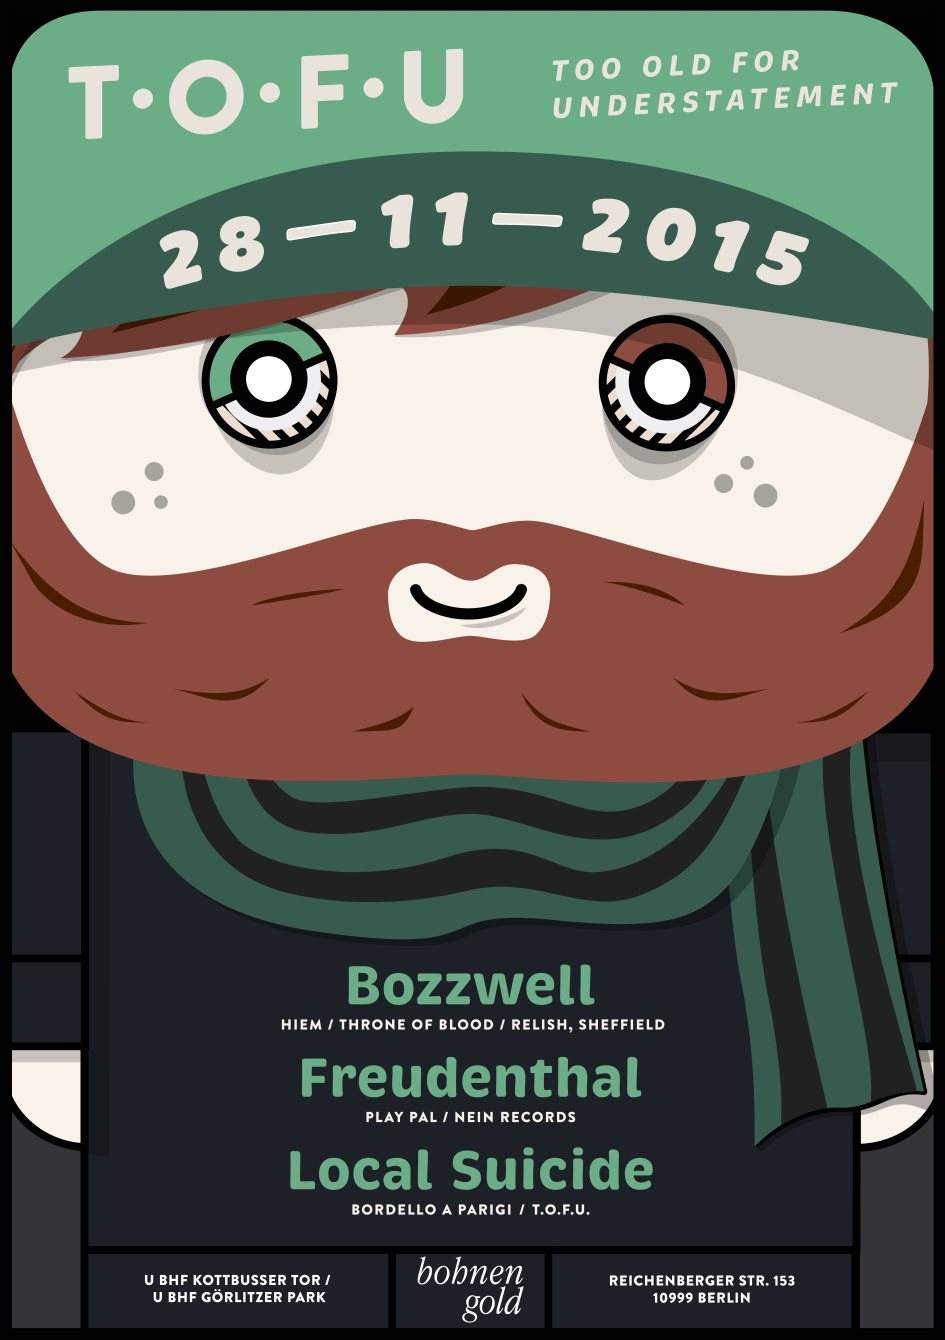 We are Tofu with Bozzwell, Freudenthal & Local Suicide - Página frontal